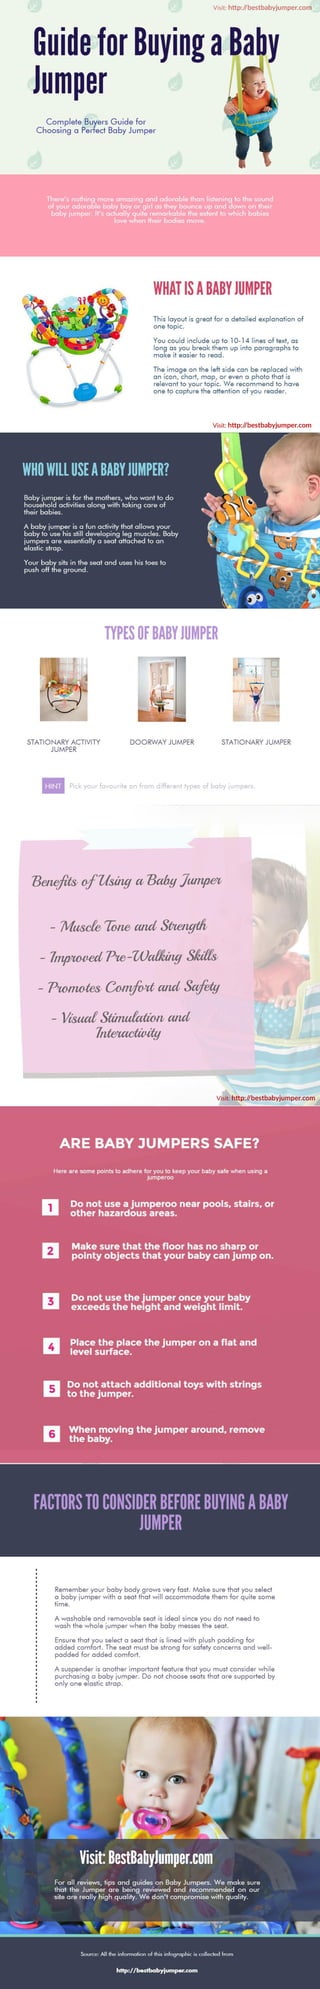 Guide for Buying a Baby Jumper